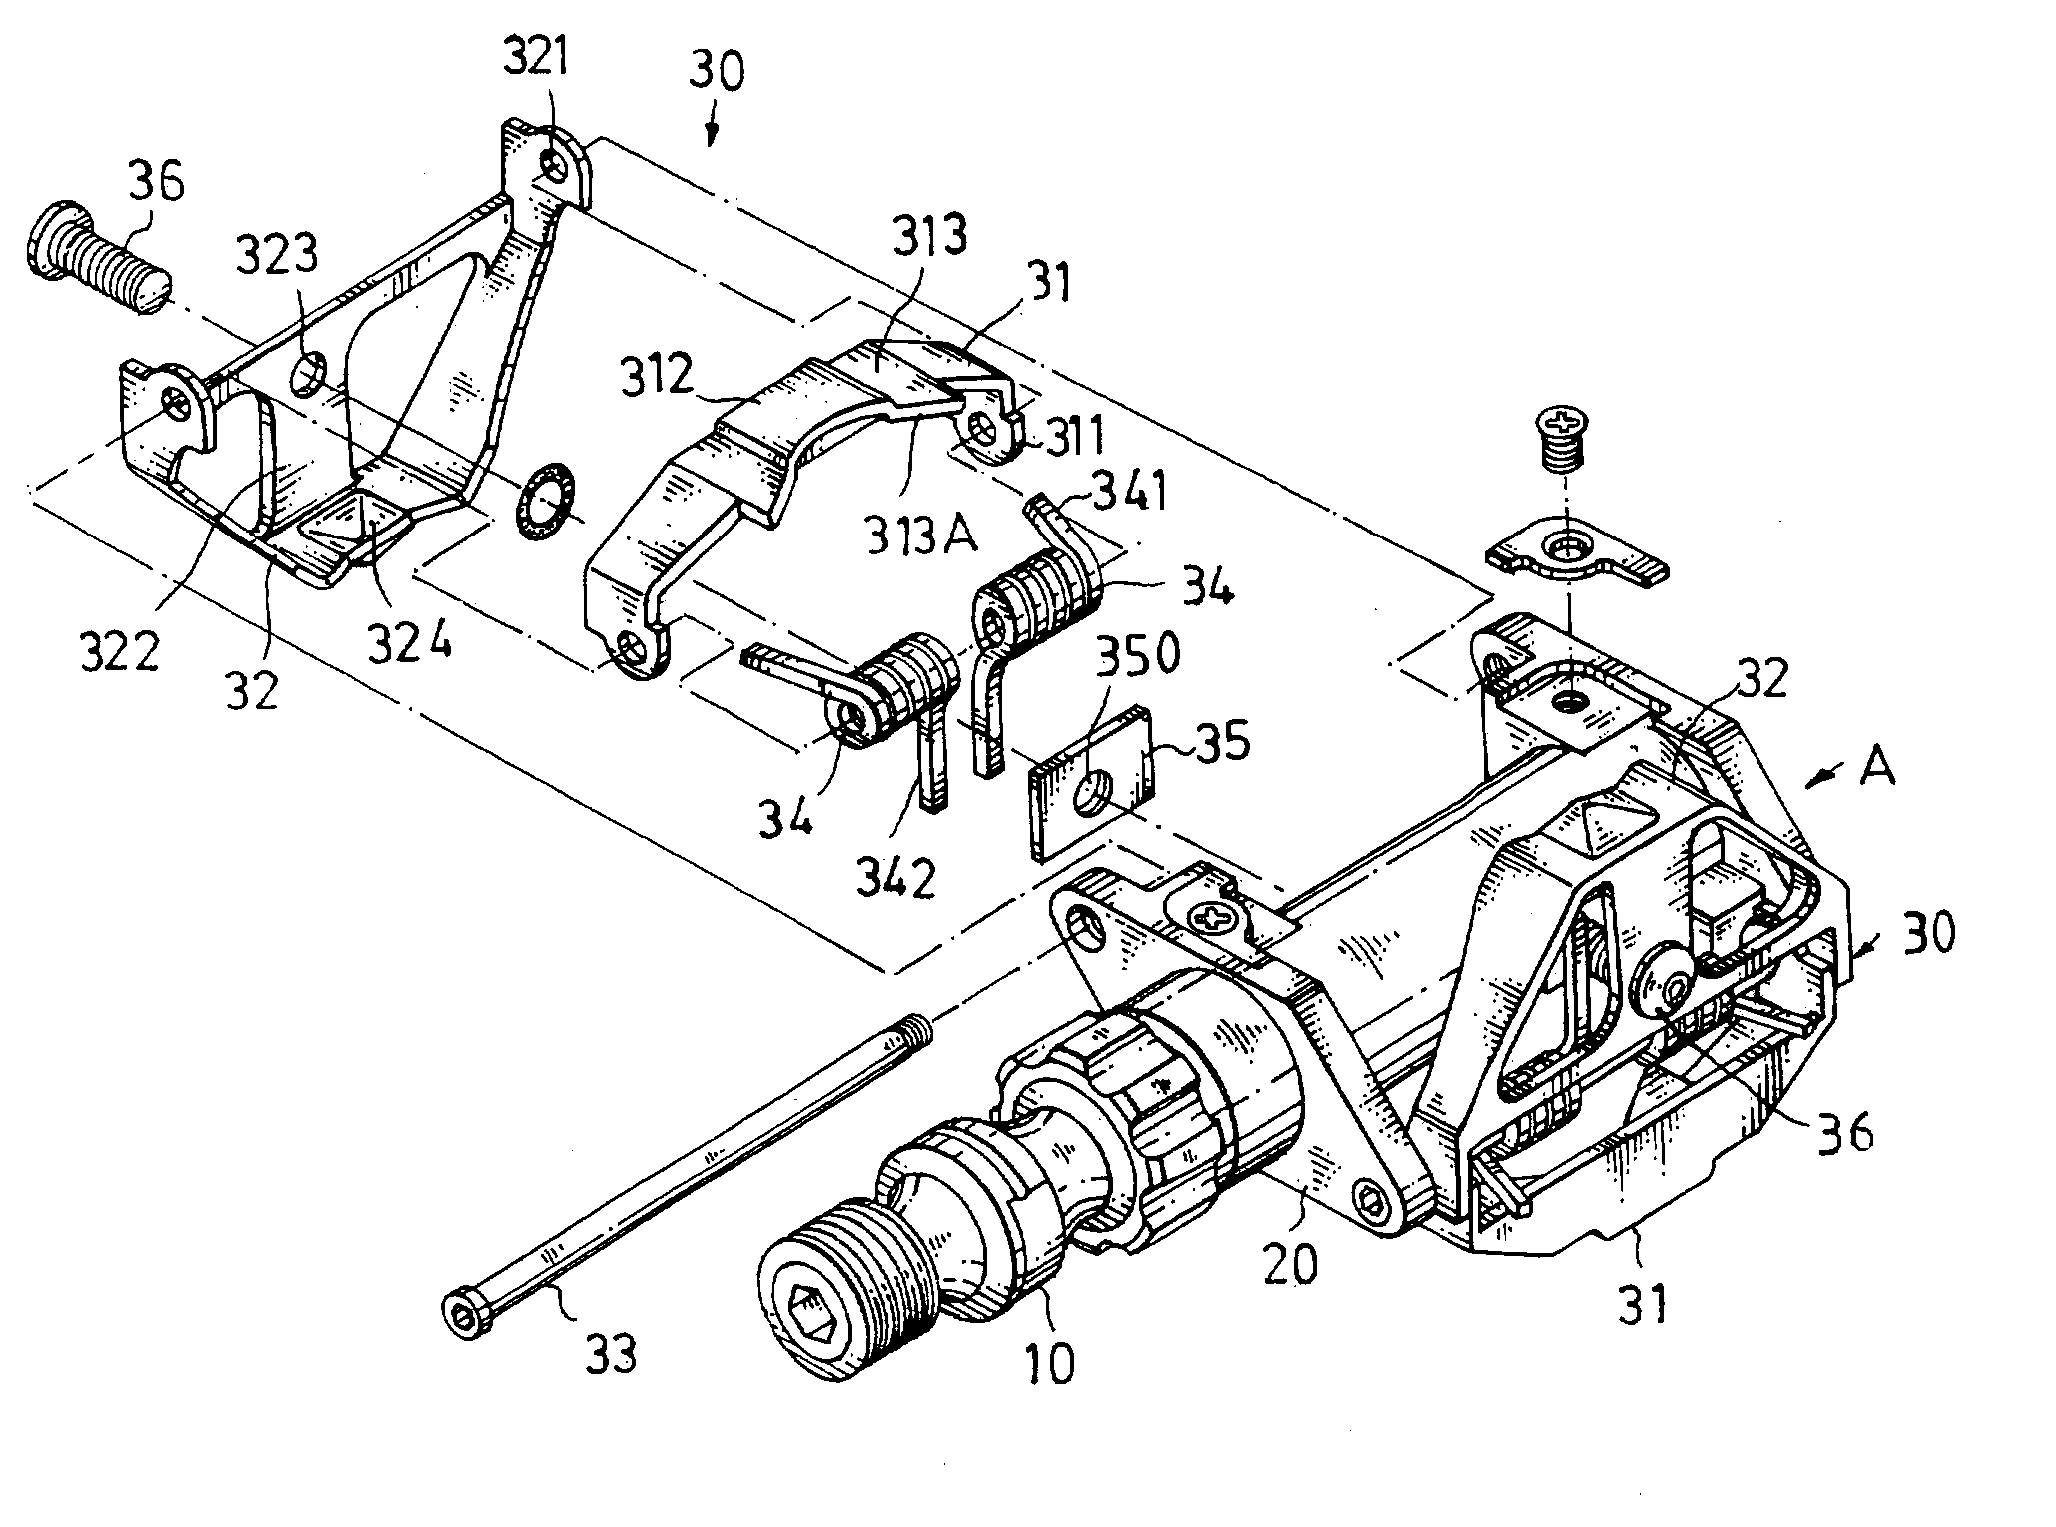 Pedal structure for a bicycle